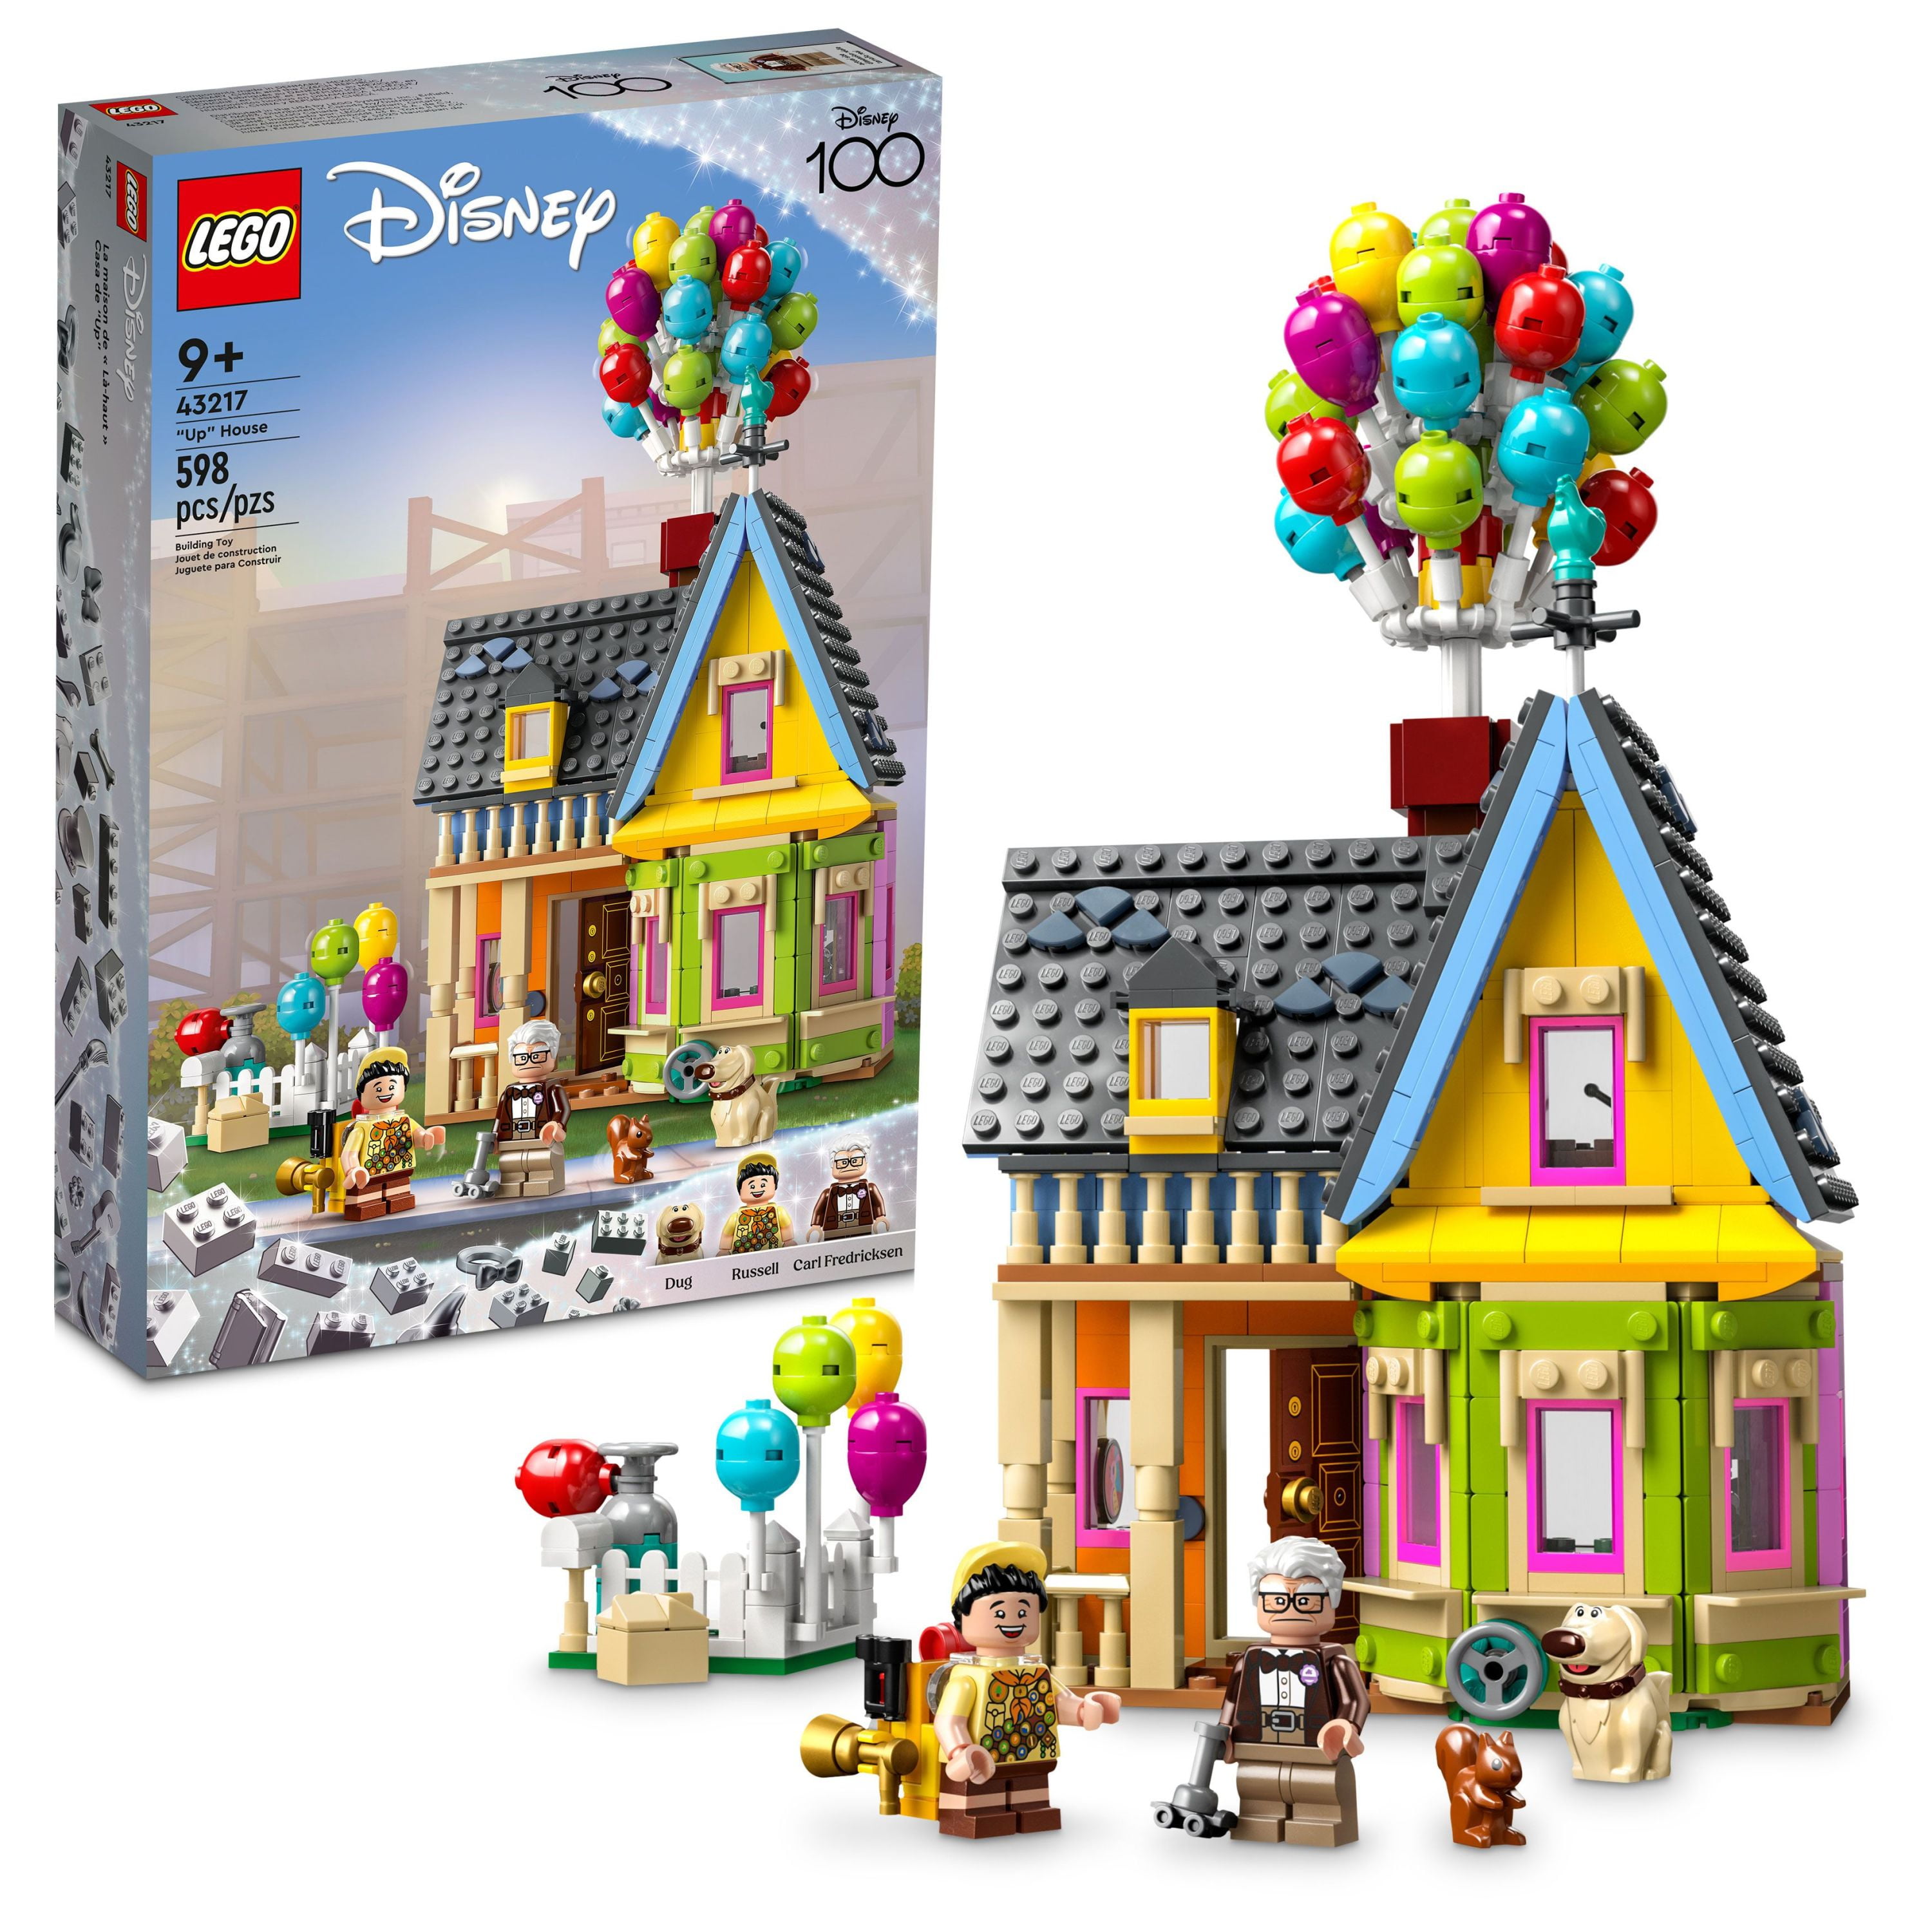 LEGO Disney and Pixar ‘Up’ House 43217 Disney 100 Celebration Classic  Building Toy Set for Kids and Movie Fans Ages 9+, A Fun Gift for Disney  Fans and